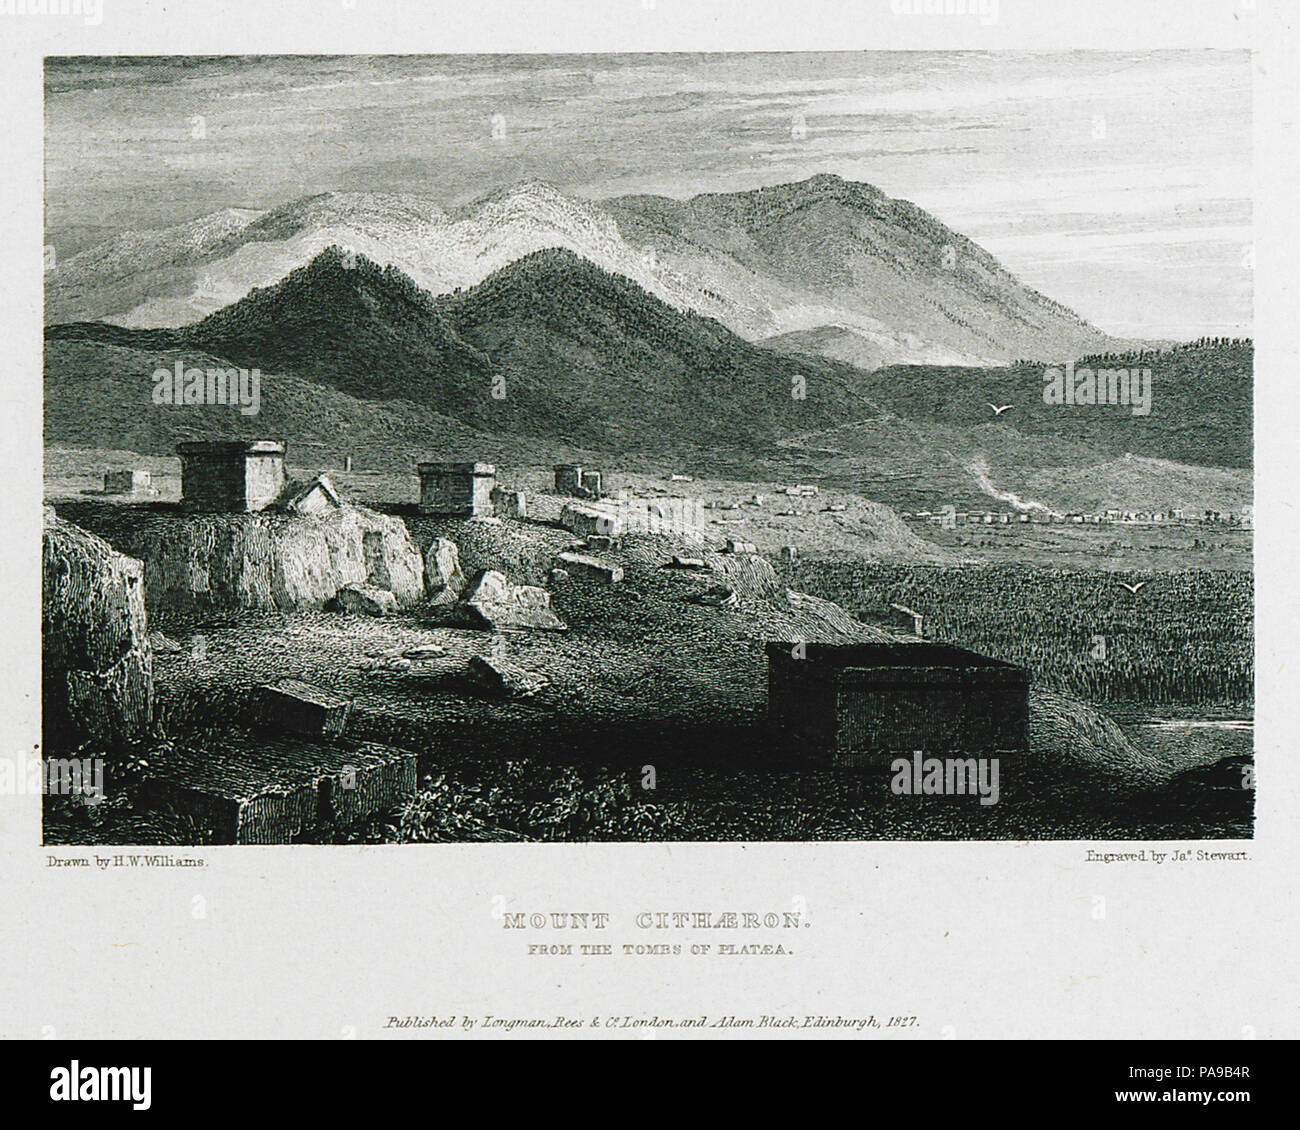 178 Mount Cithaeron From the tombs of Platea - Williams Hugh William - 1829 Stock Photo